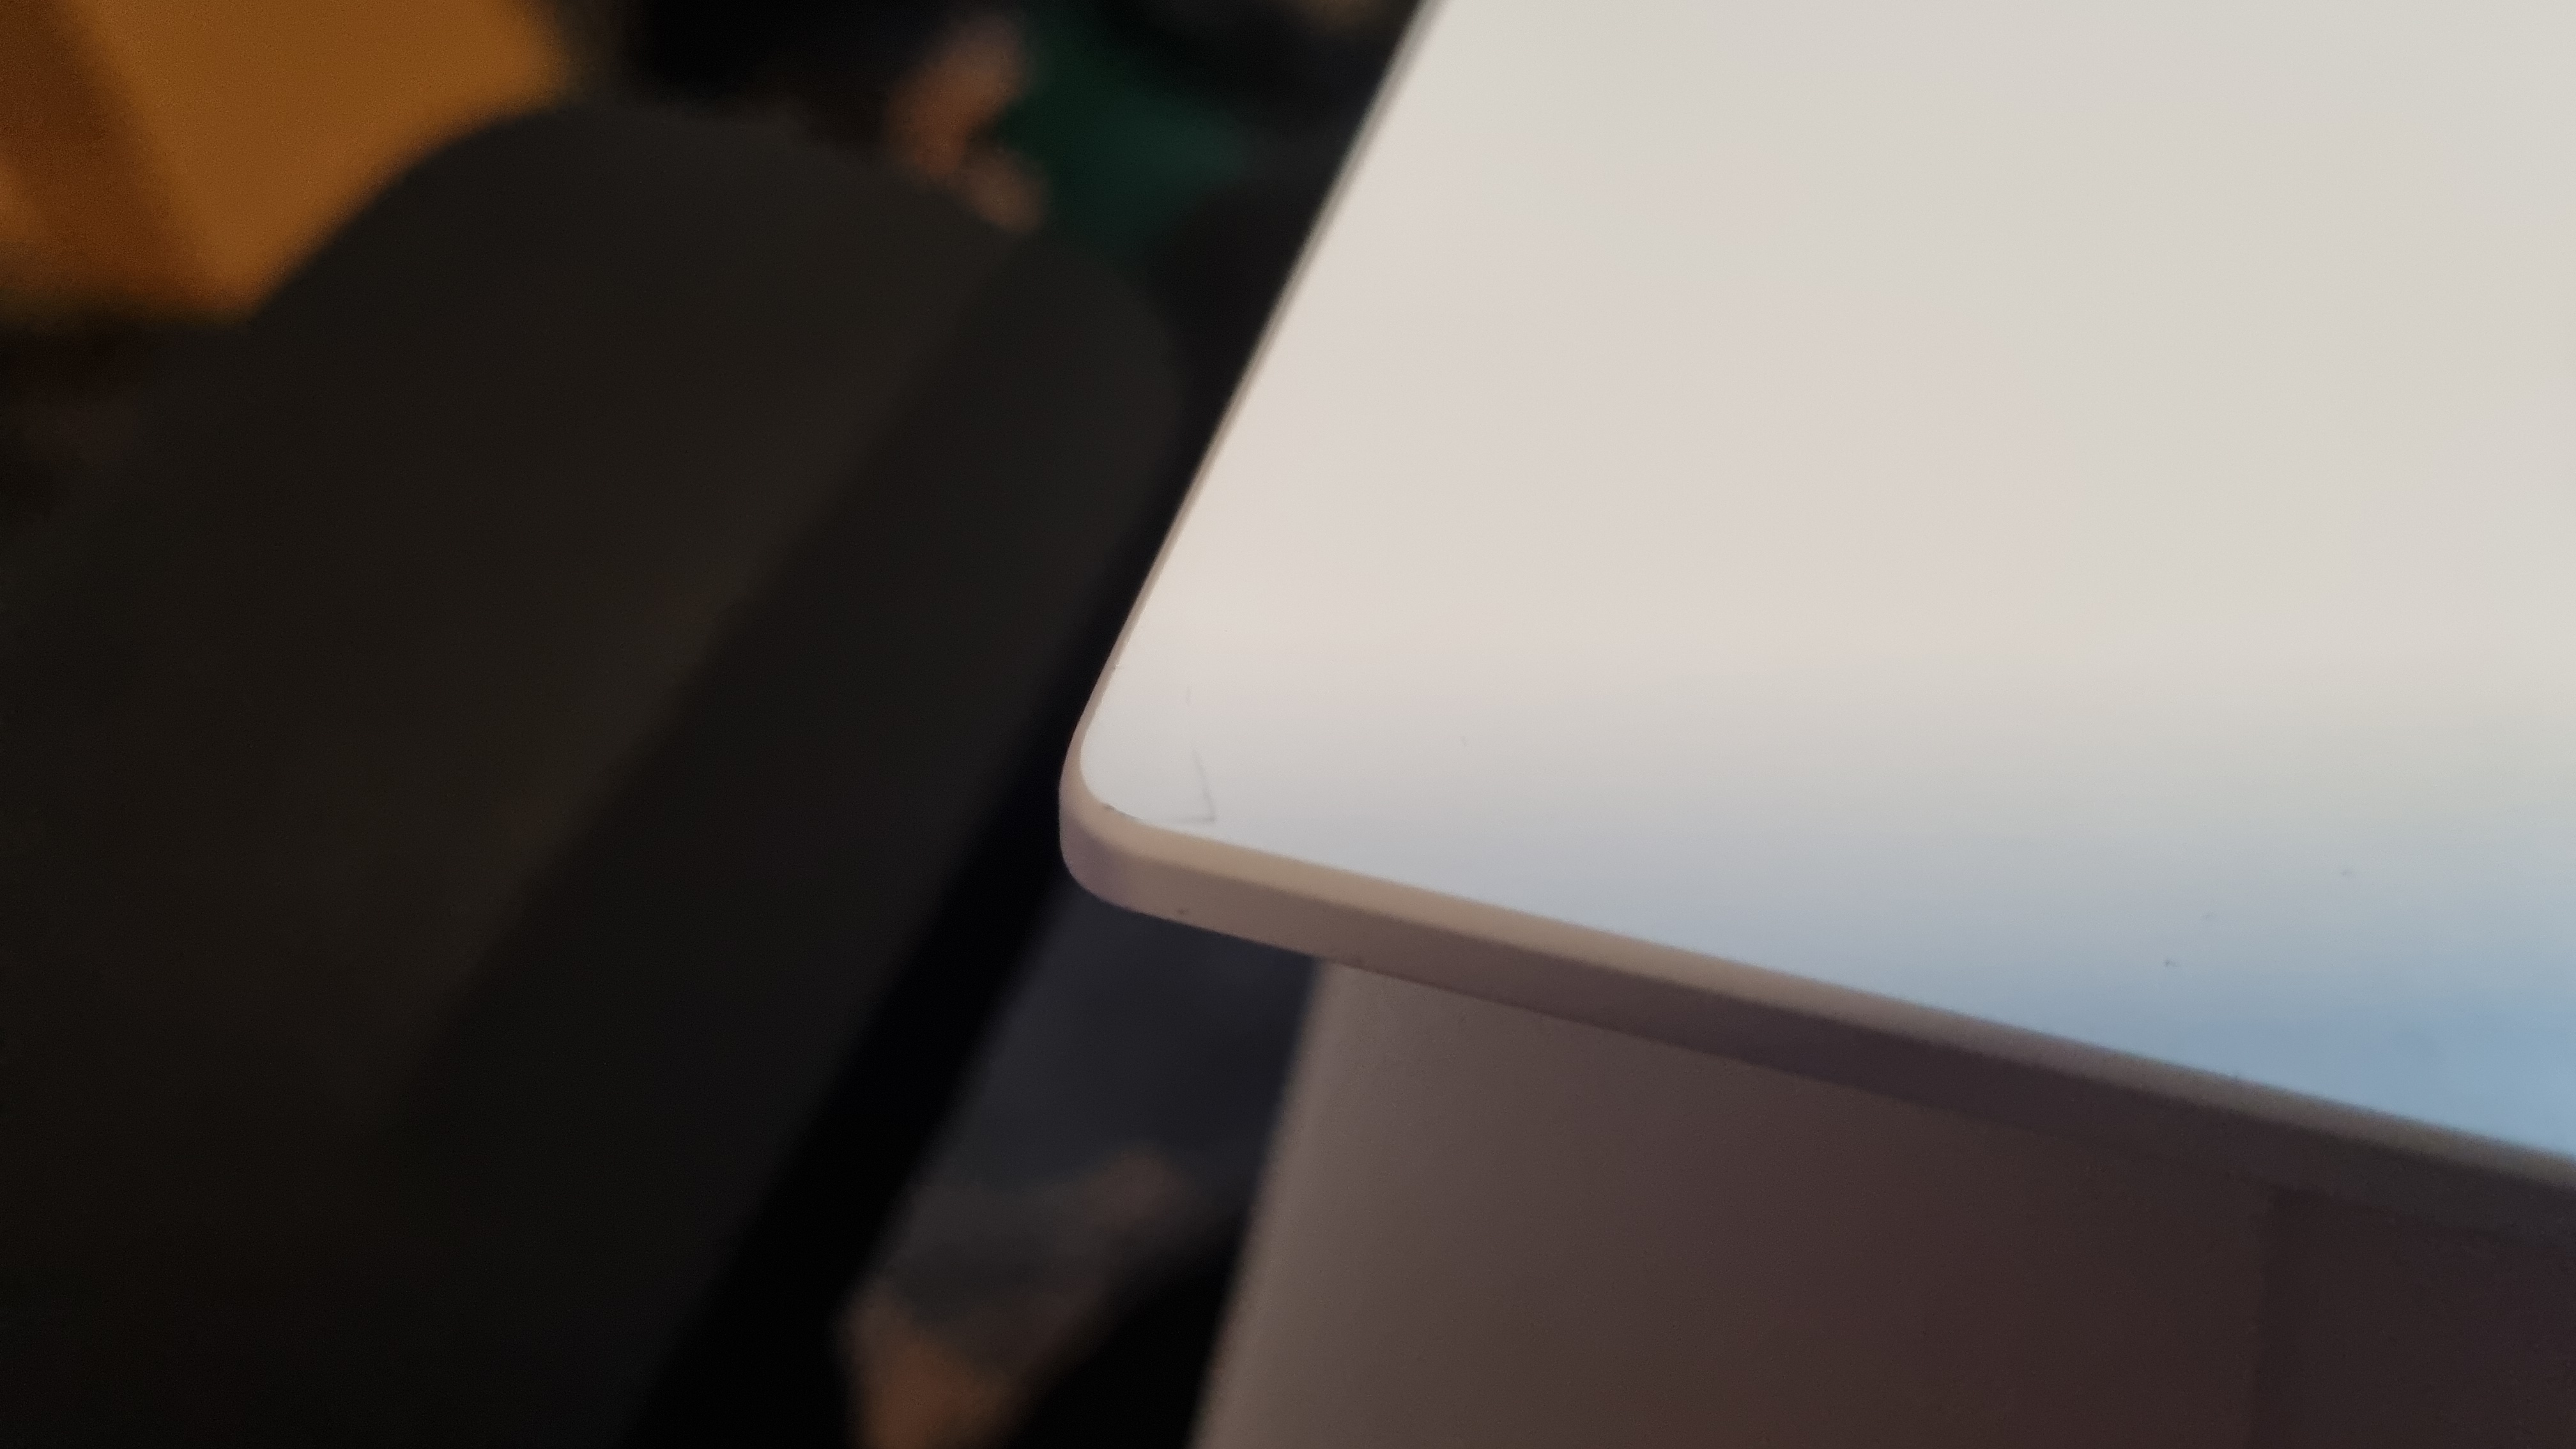 The corner of the Lenovo Legion 7 gaming laptop, showing marks and signs of wear on the white finish